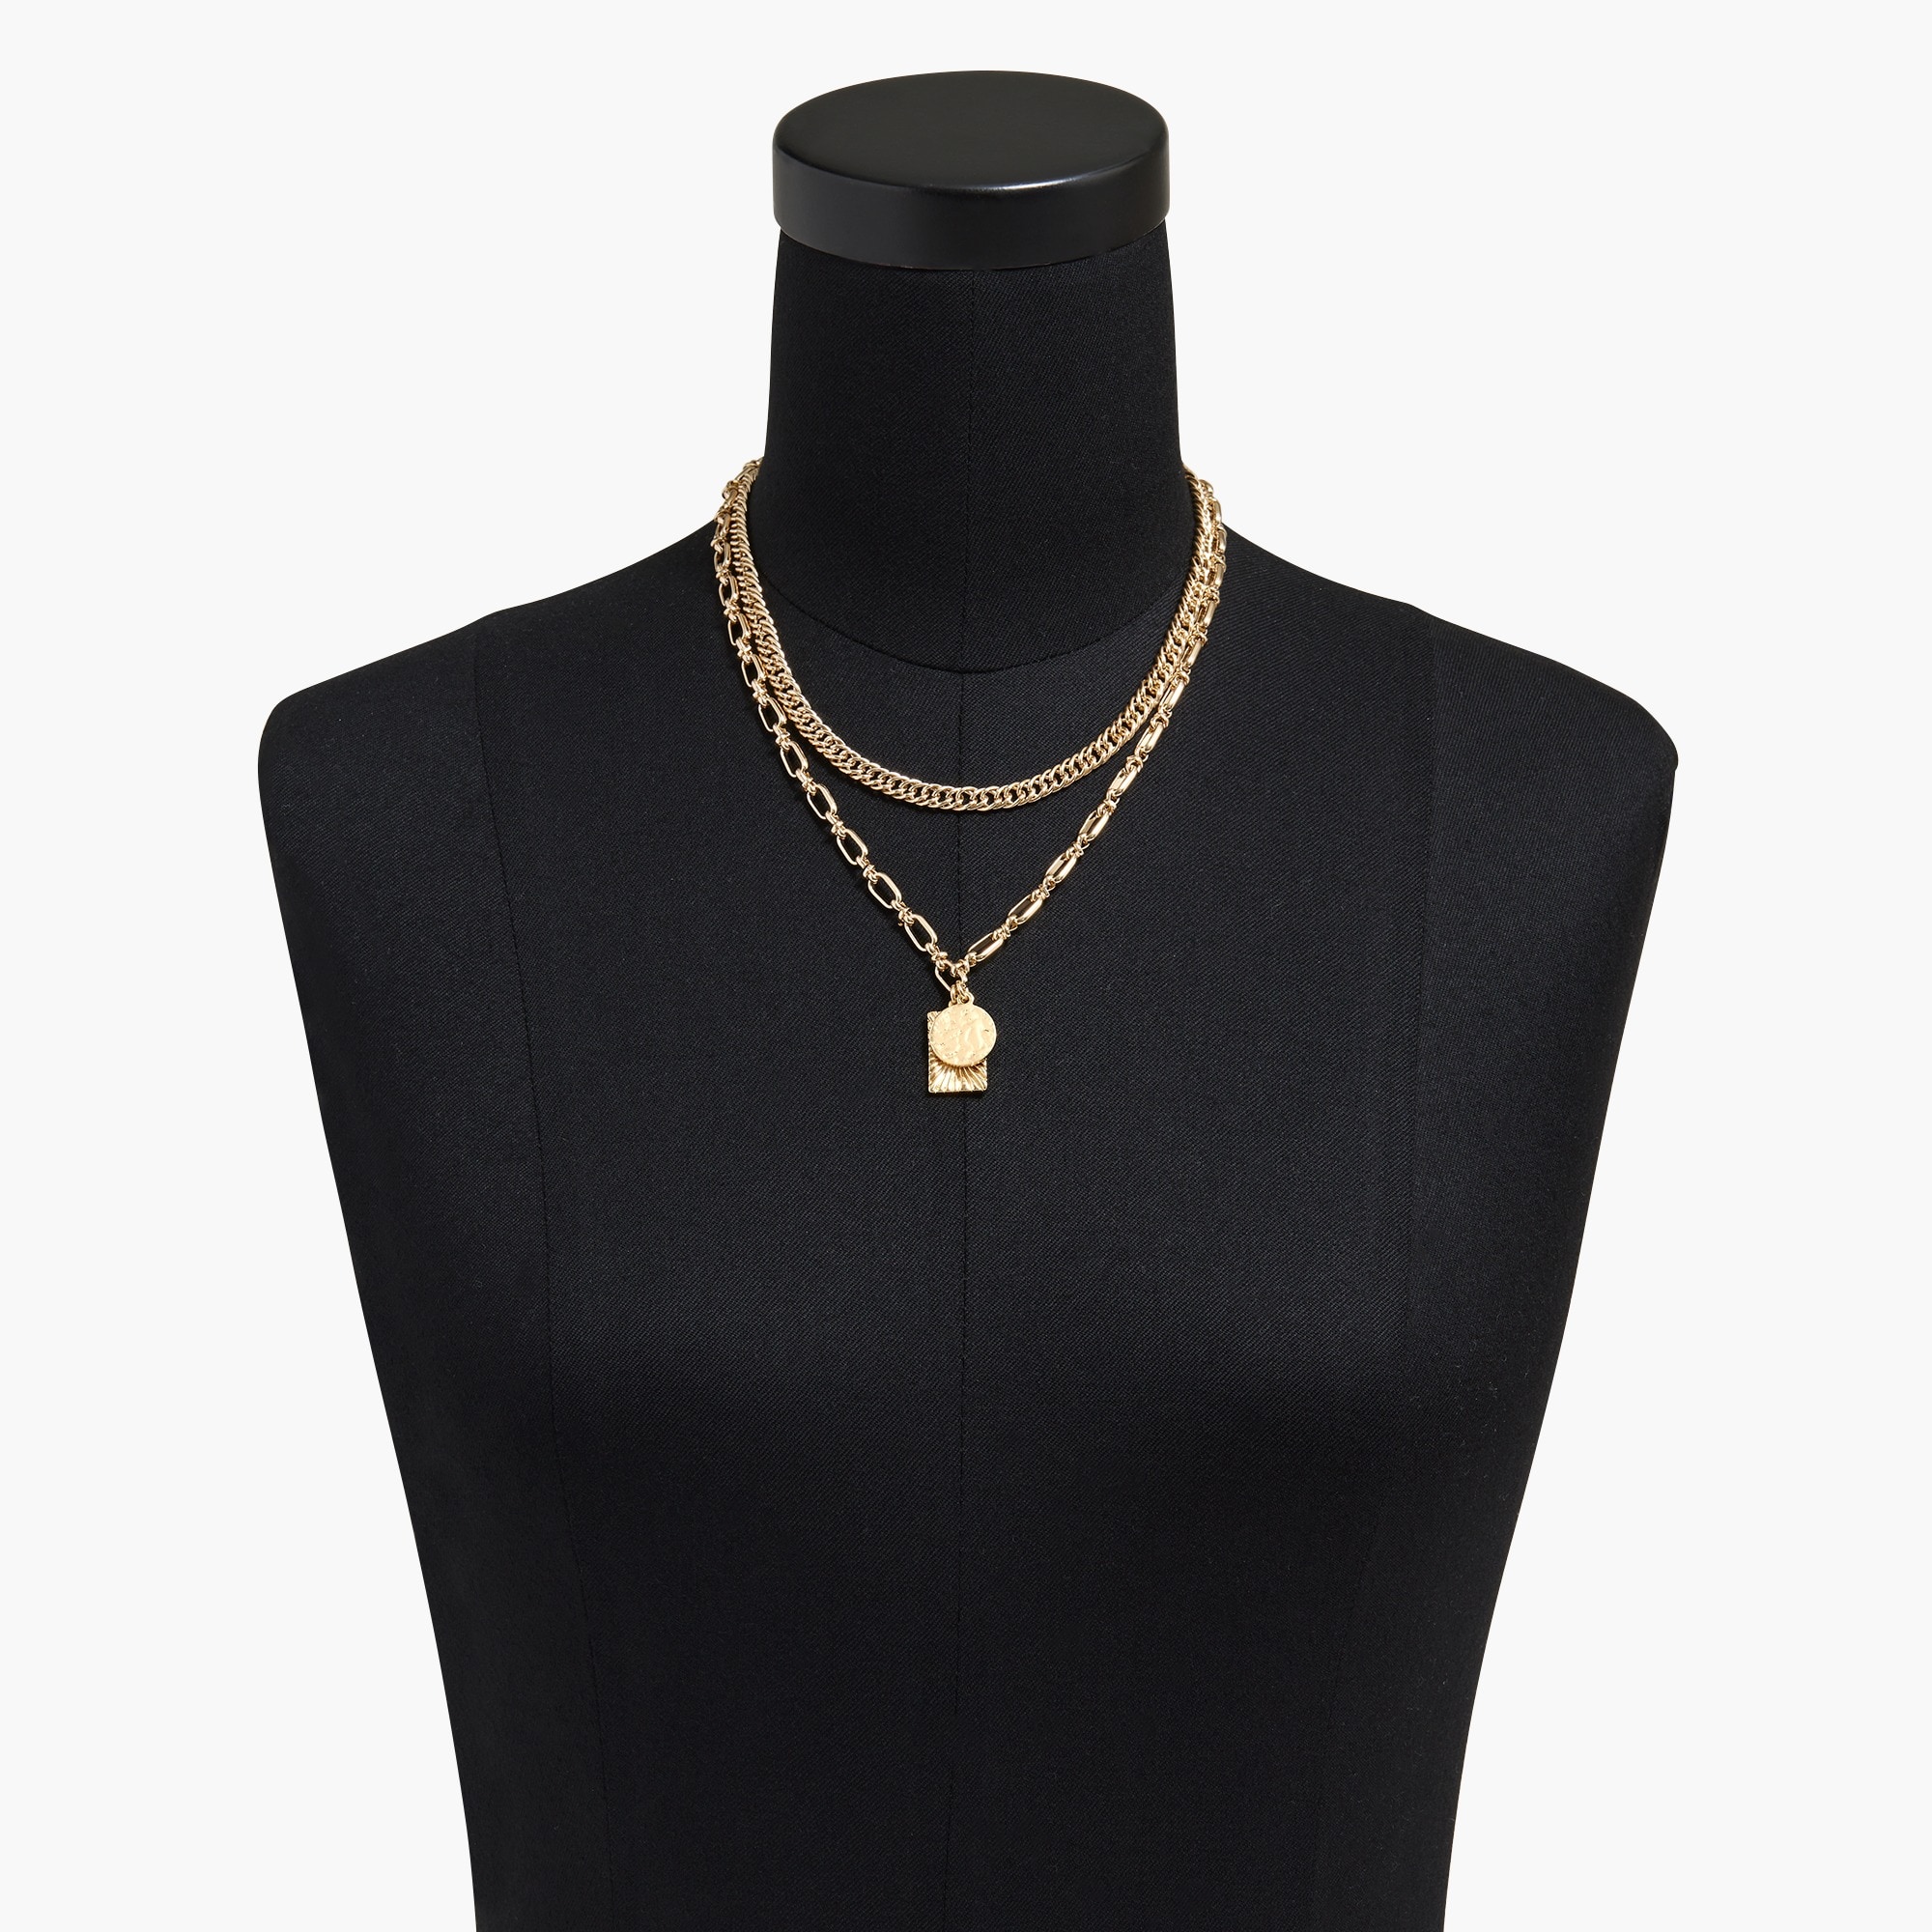 Gold layering pendant necklace